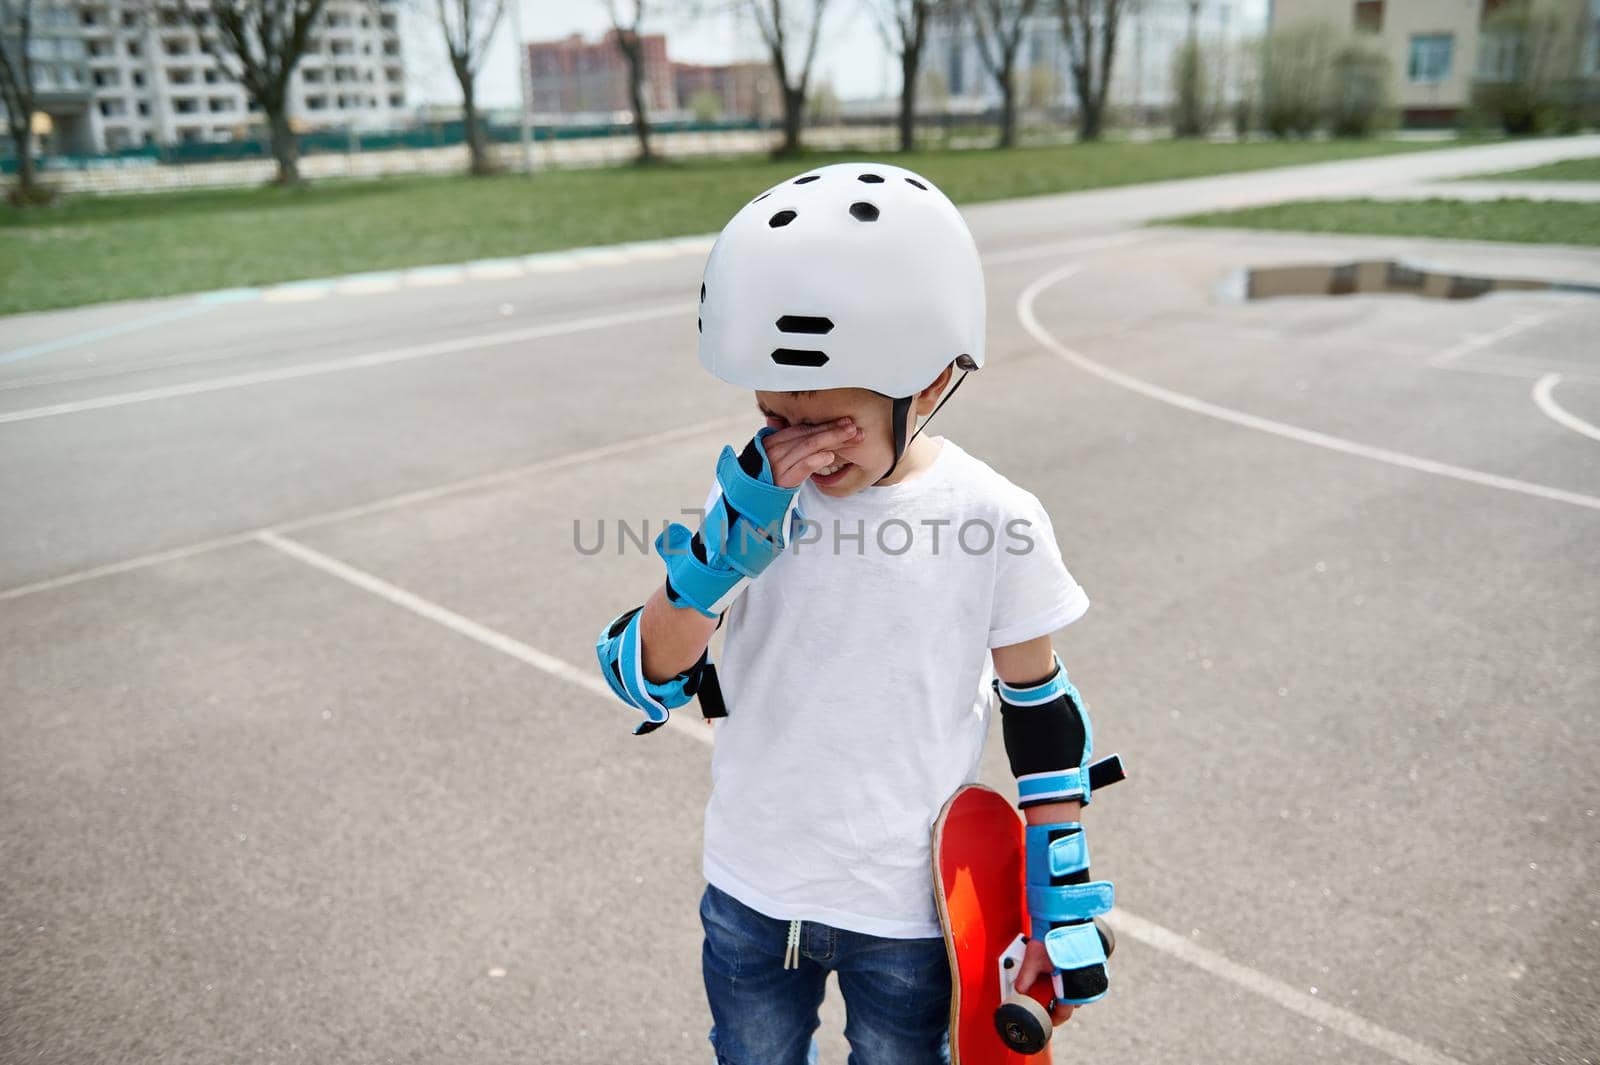 Upset boy skateboarder in protective gear frustratedly wipes tears from his eyes and holds a skateboard in one hand while standing on a sports playground by artgf